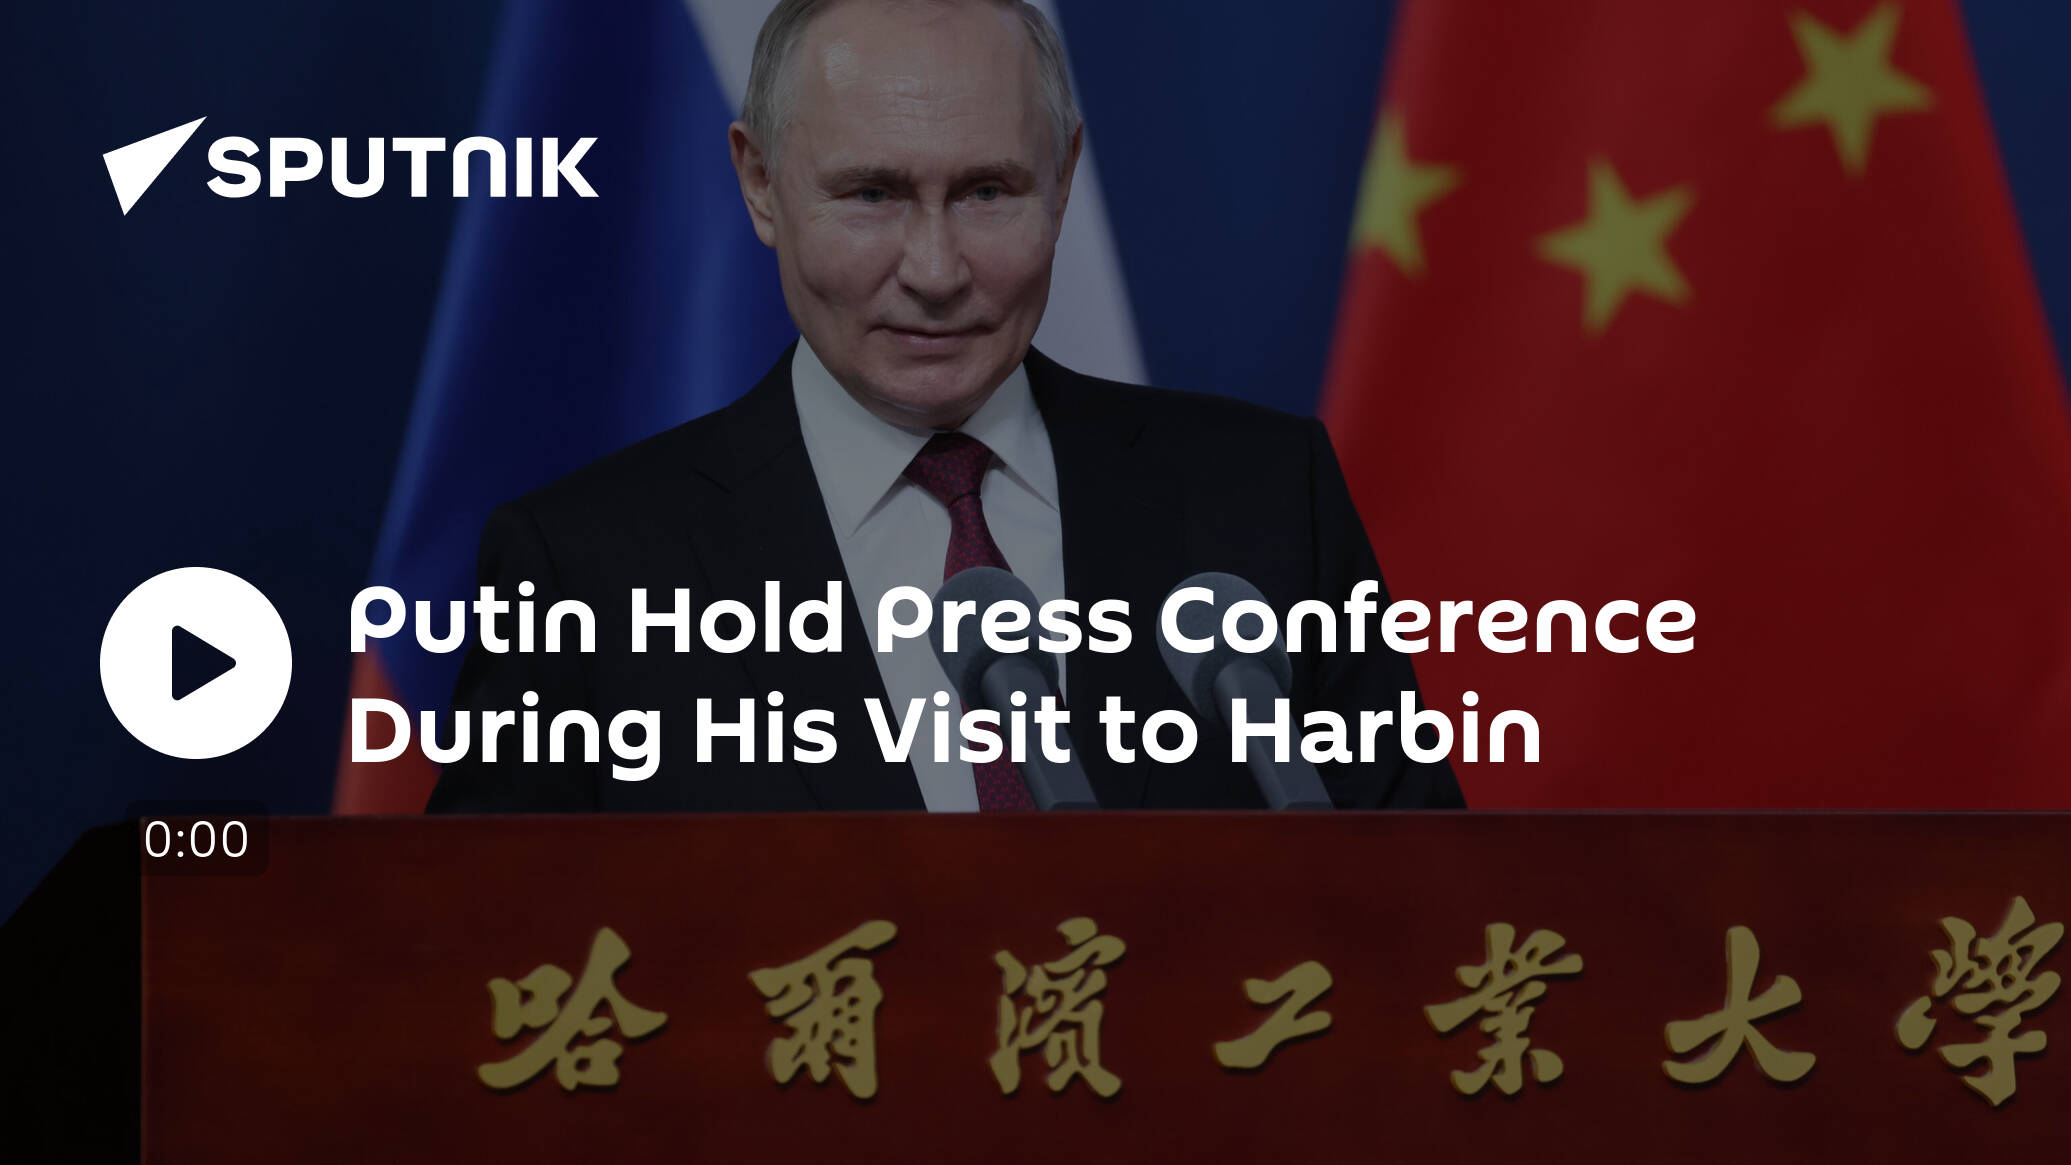 Putin Visits City of Harbin During Stay in China [Video]